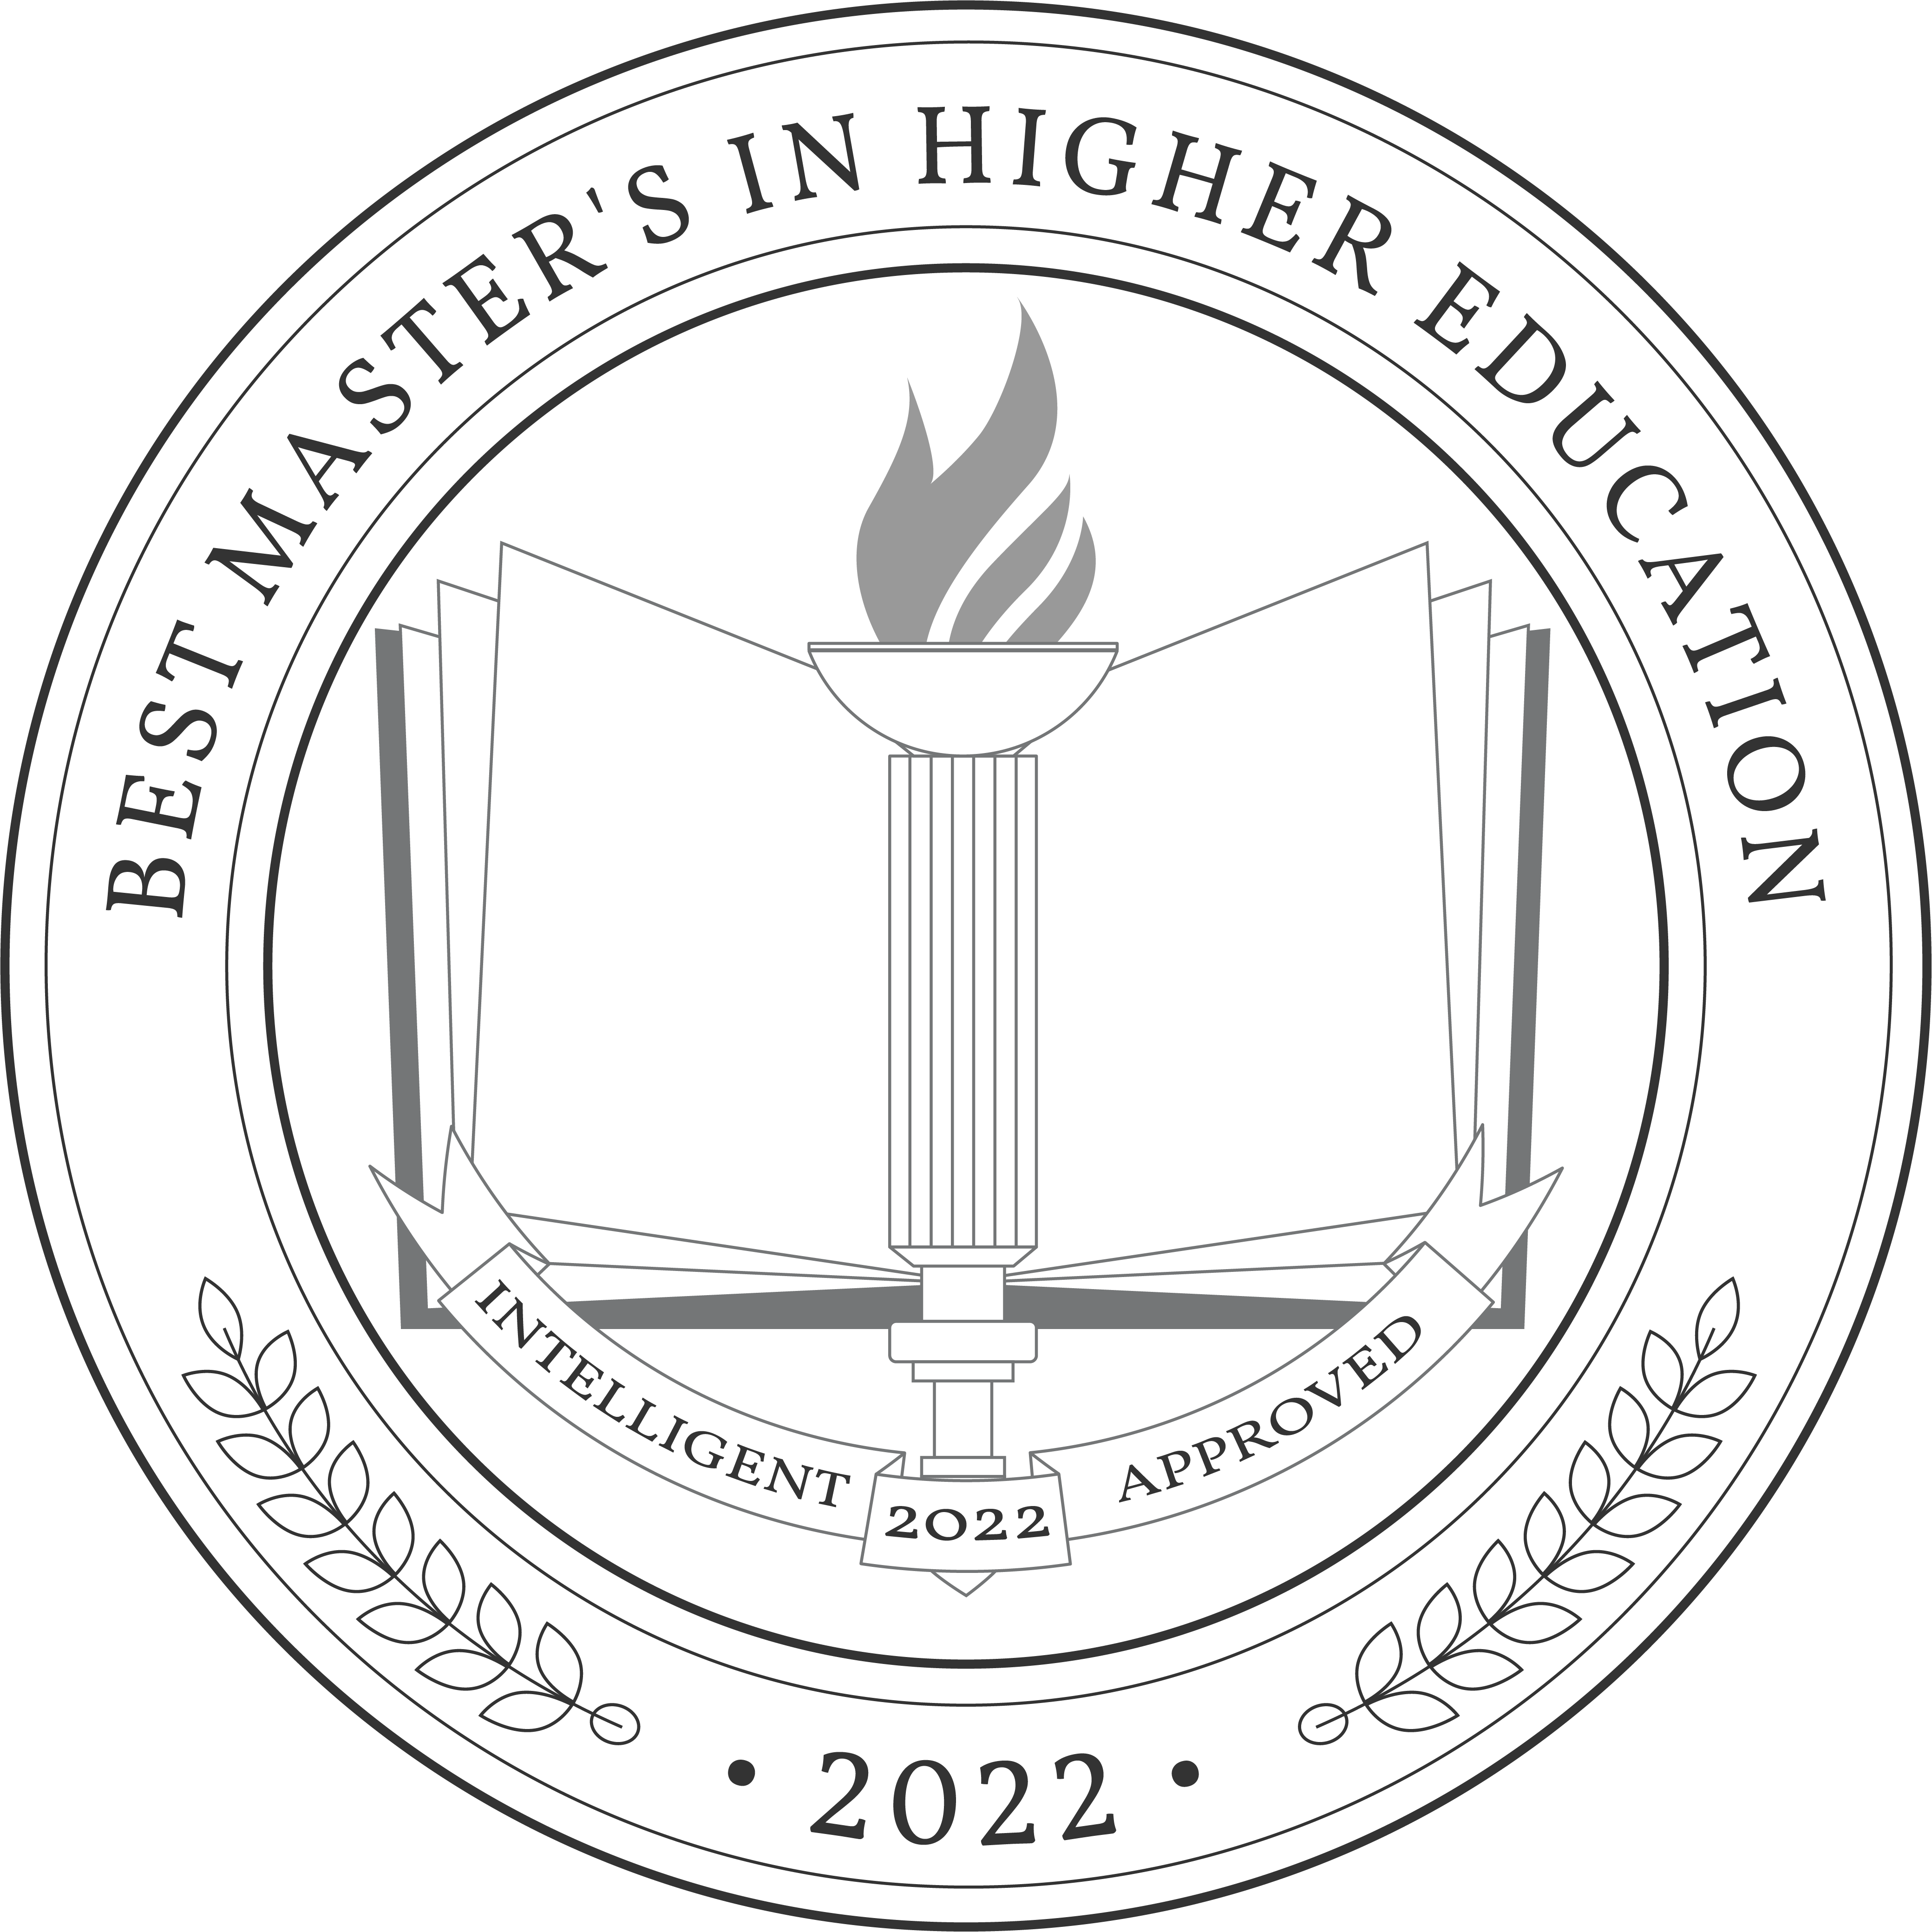 Best Master's in Higher Education Badge